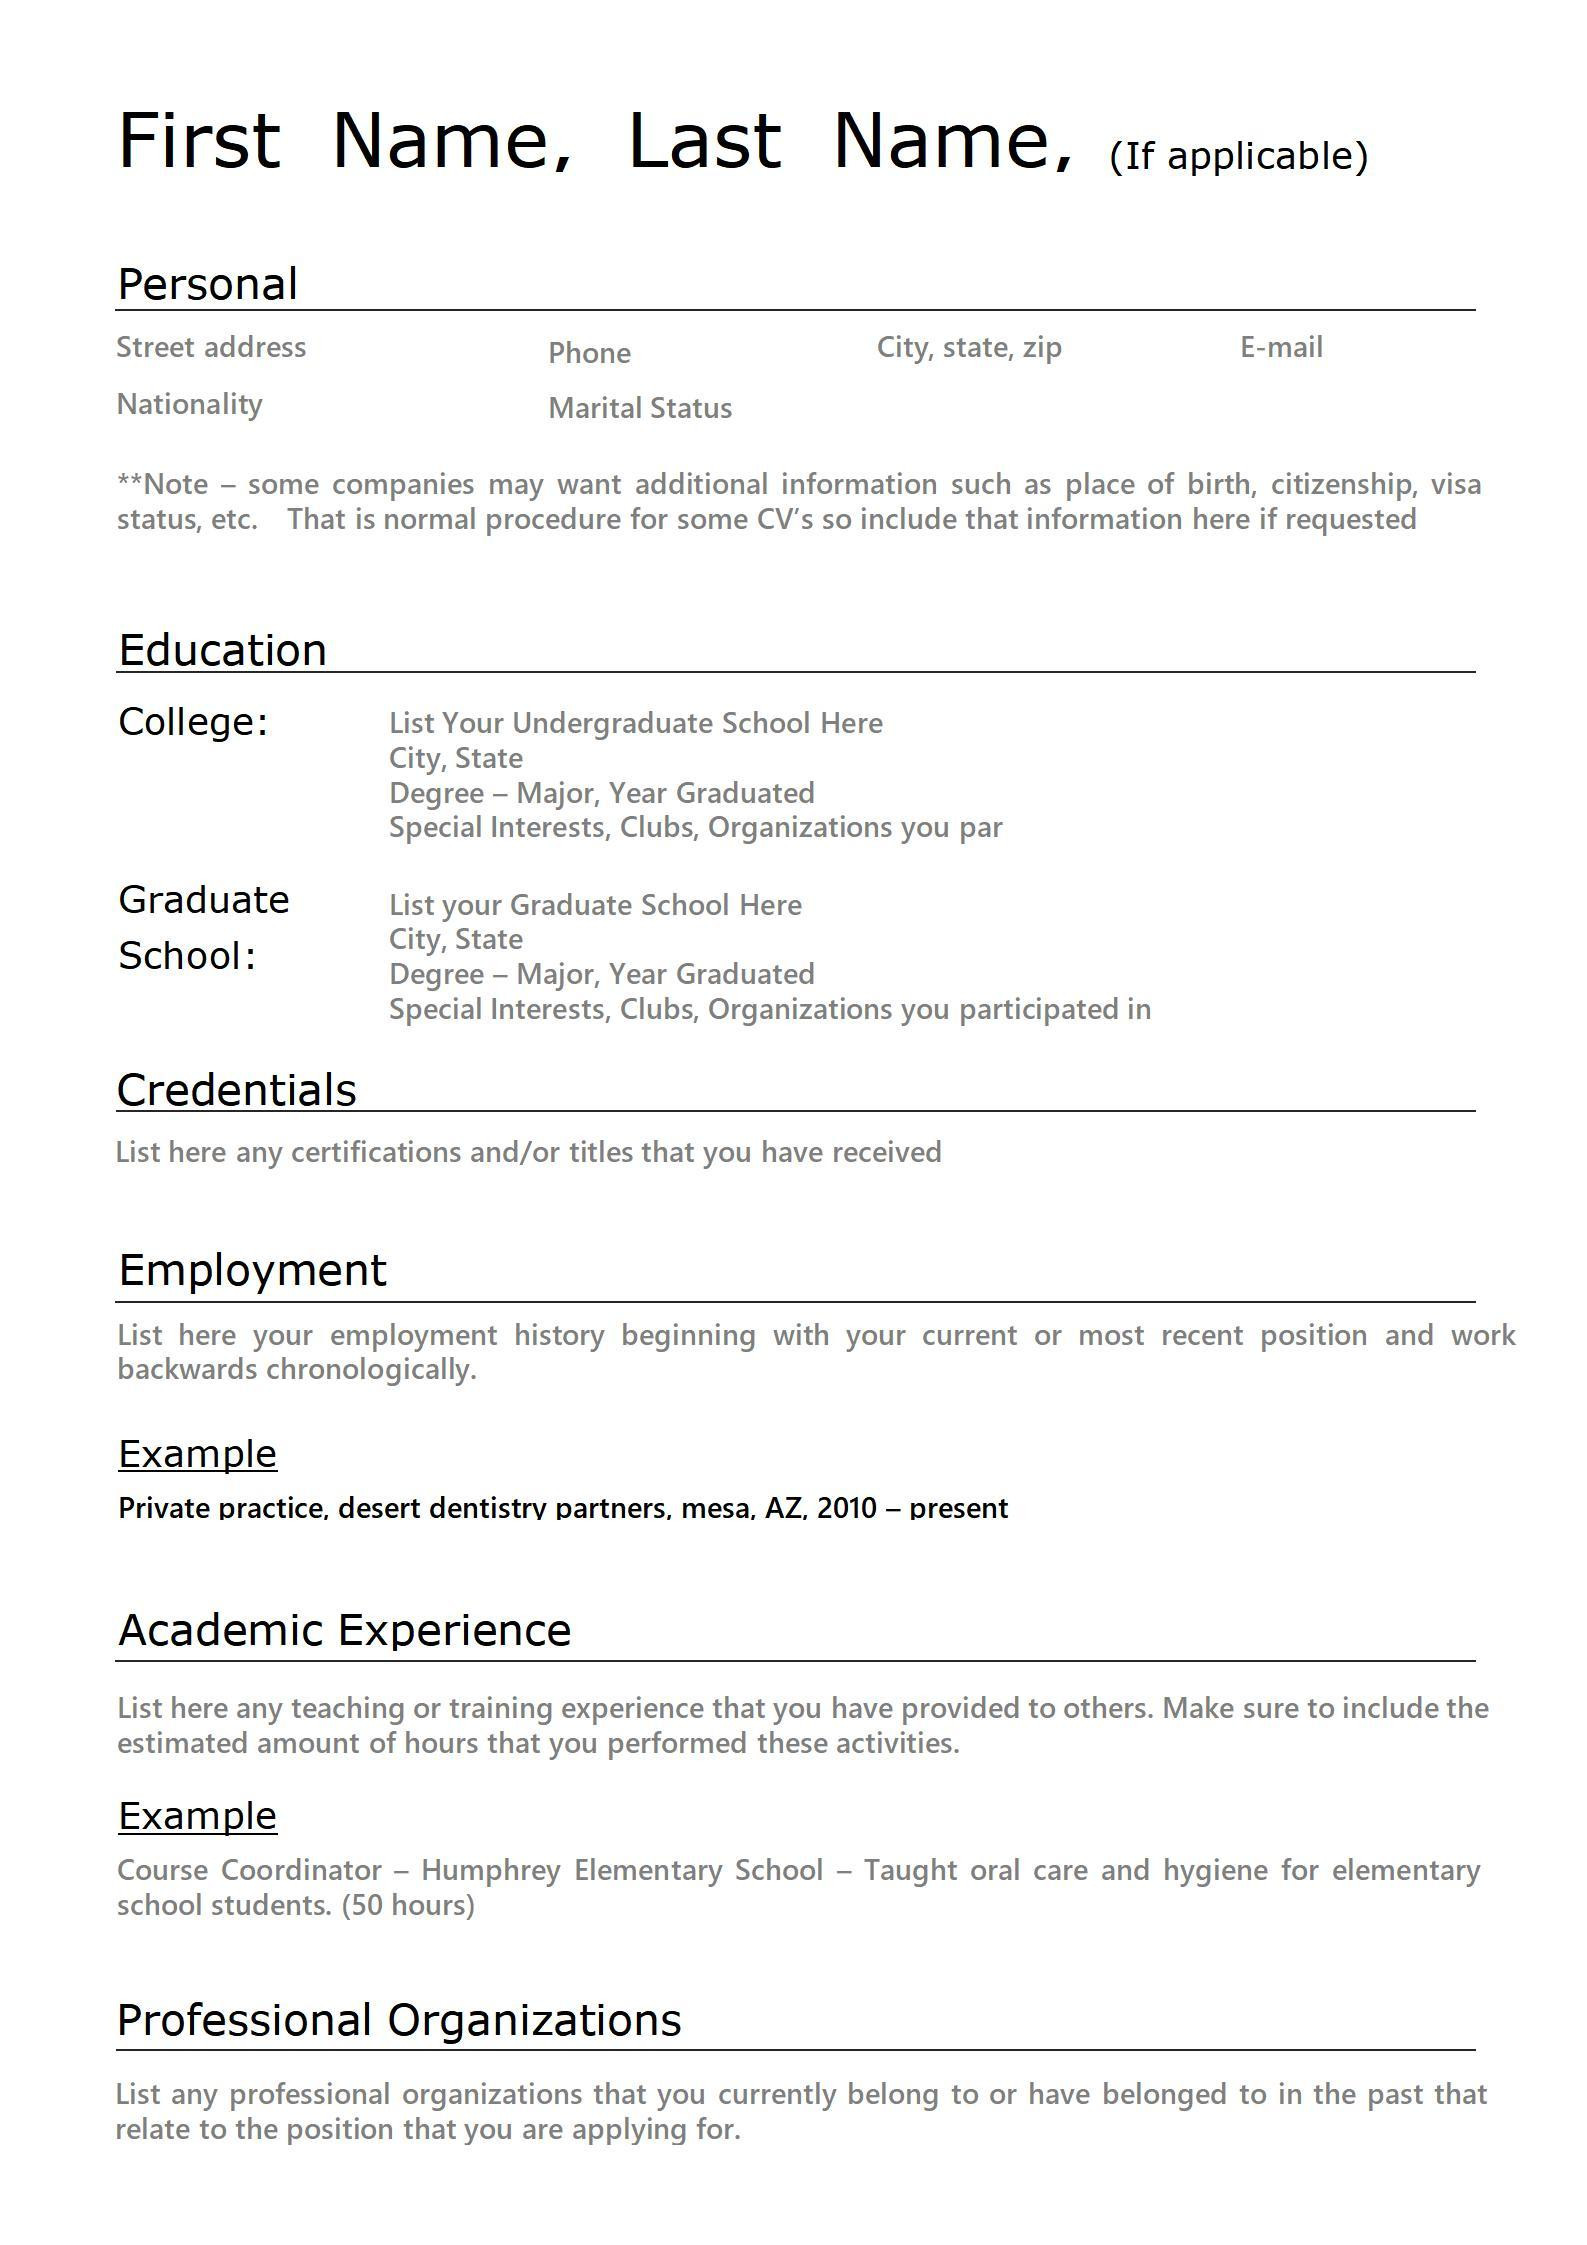 Sample Of High School Student Resume with No Experience First-time Resume with No Experience Samples Wps Office Academy